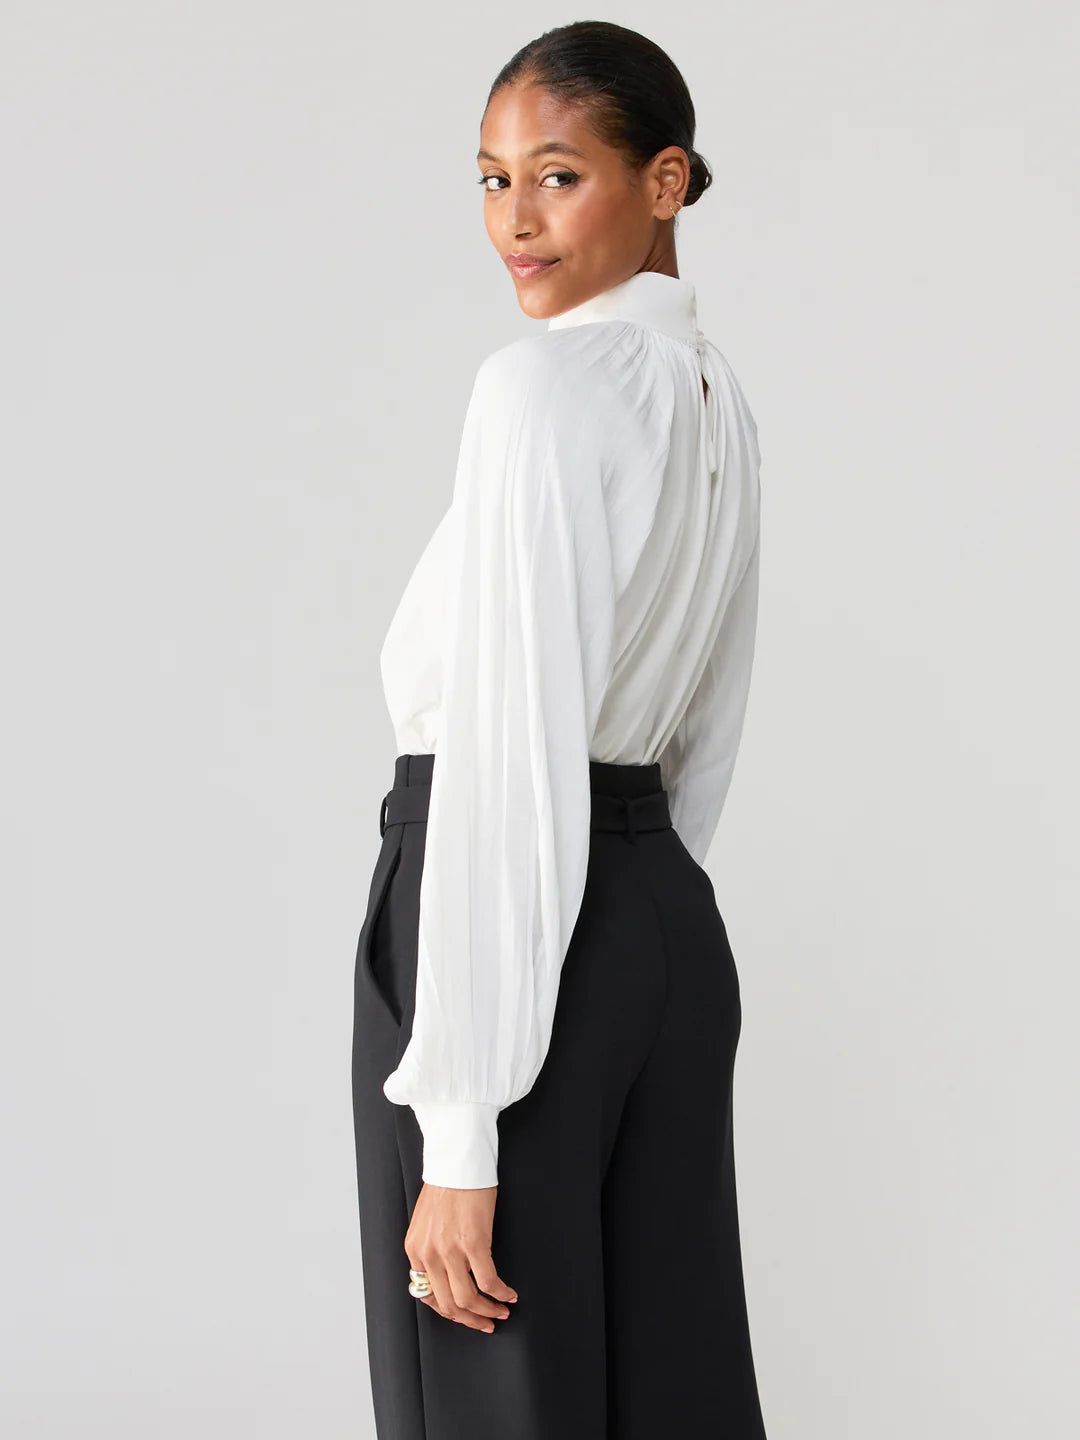 White Blouse Top Apex Ethical Boutique